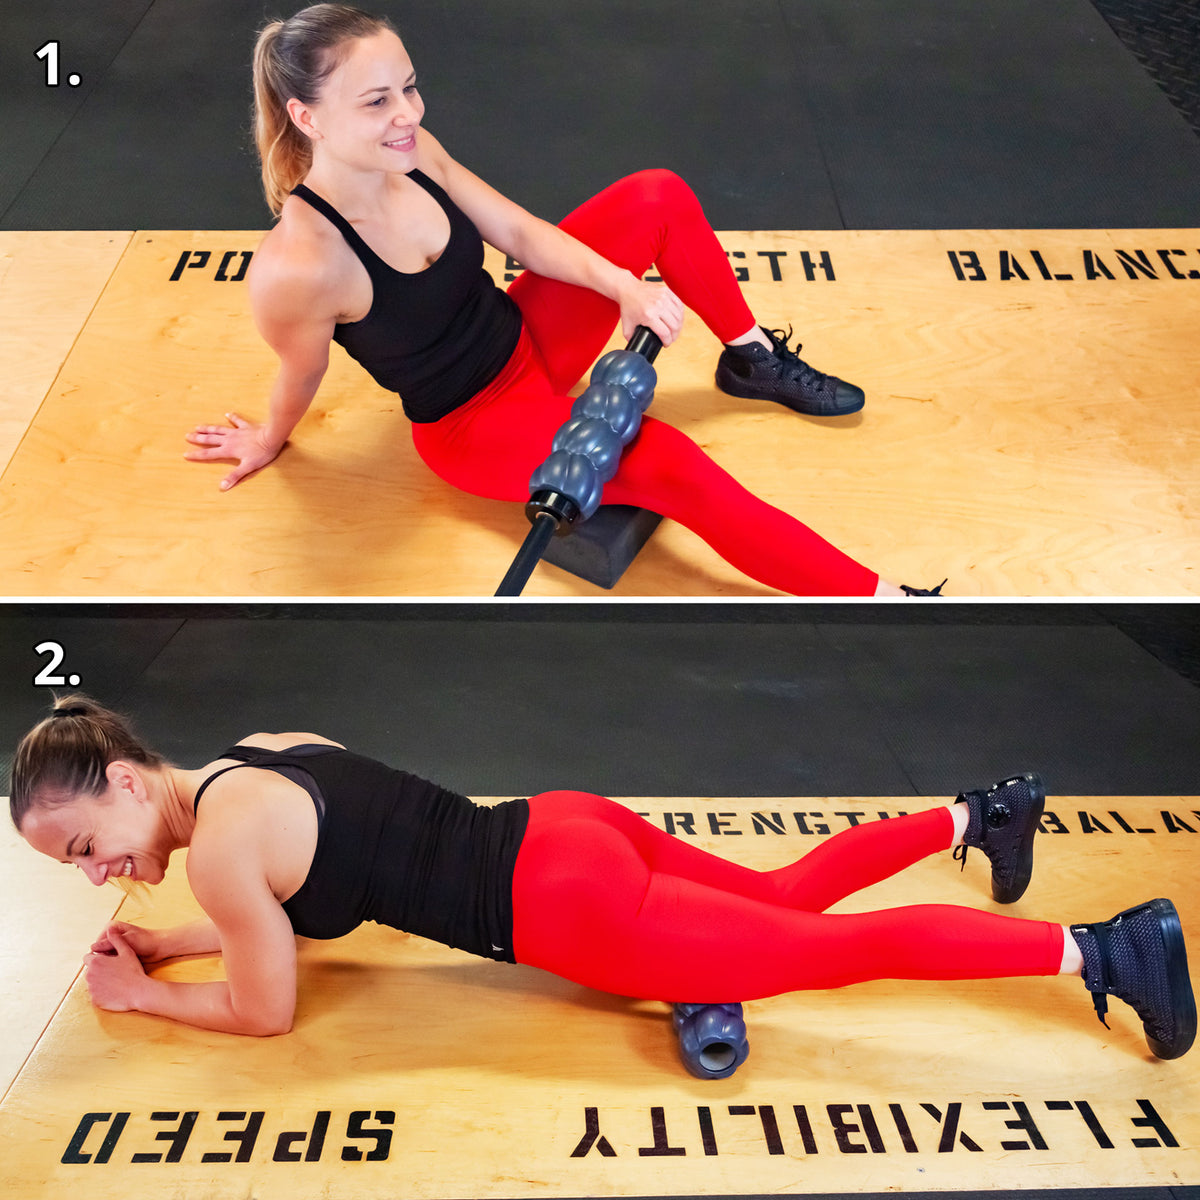 An athletic female demonstrating two ways to perform myofascial release with a Revolv Roller on the quadriceps muscles, with and without a barbell.